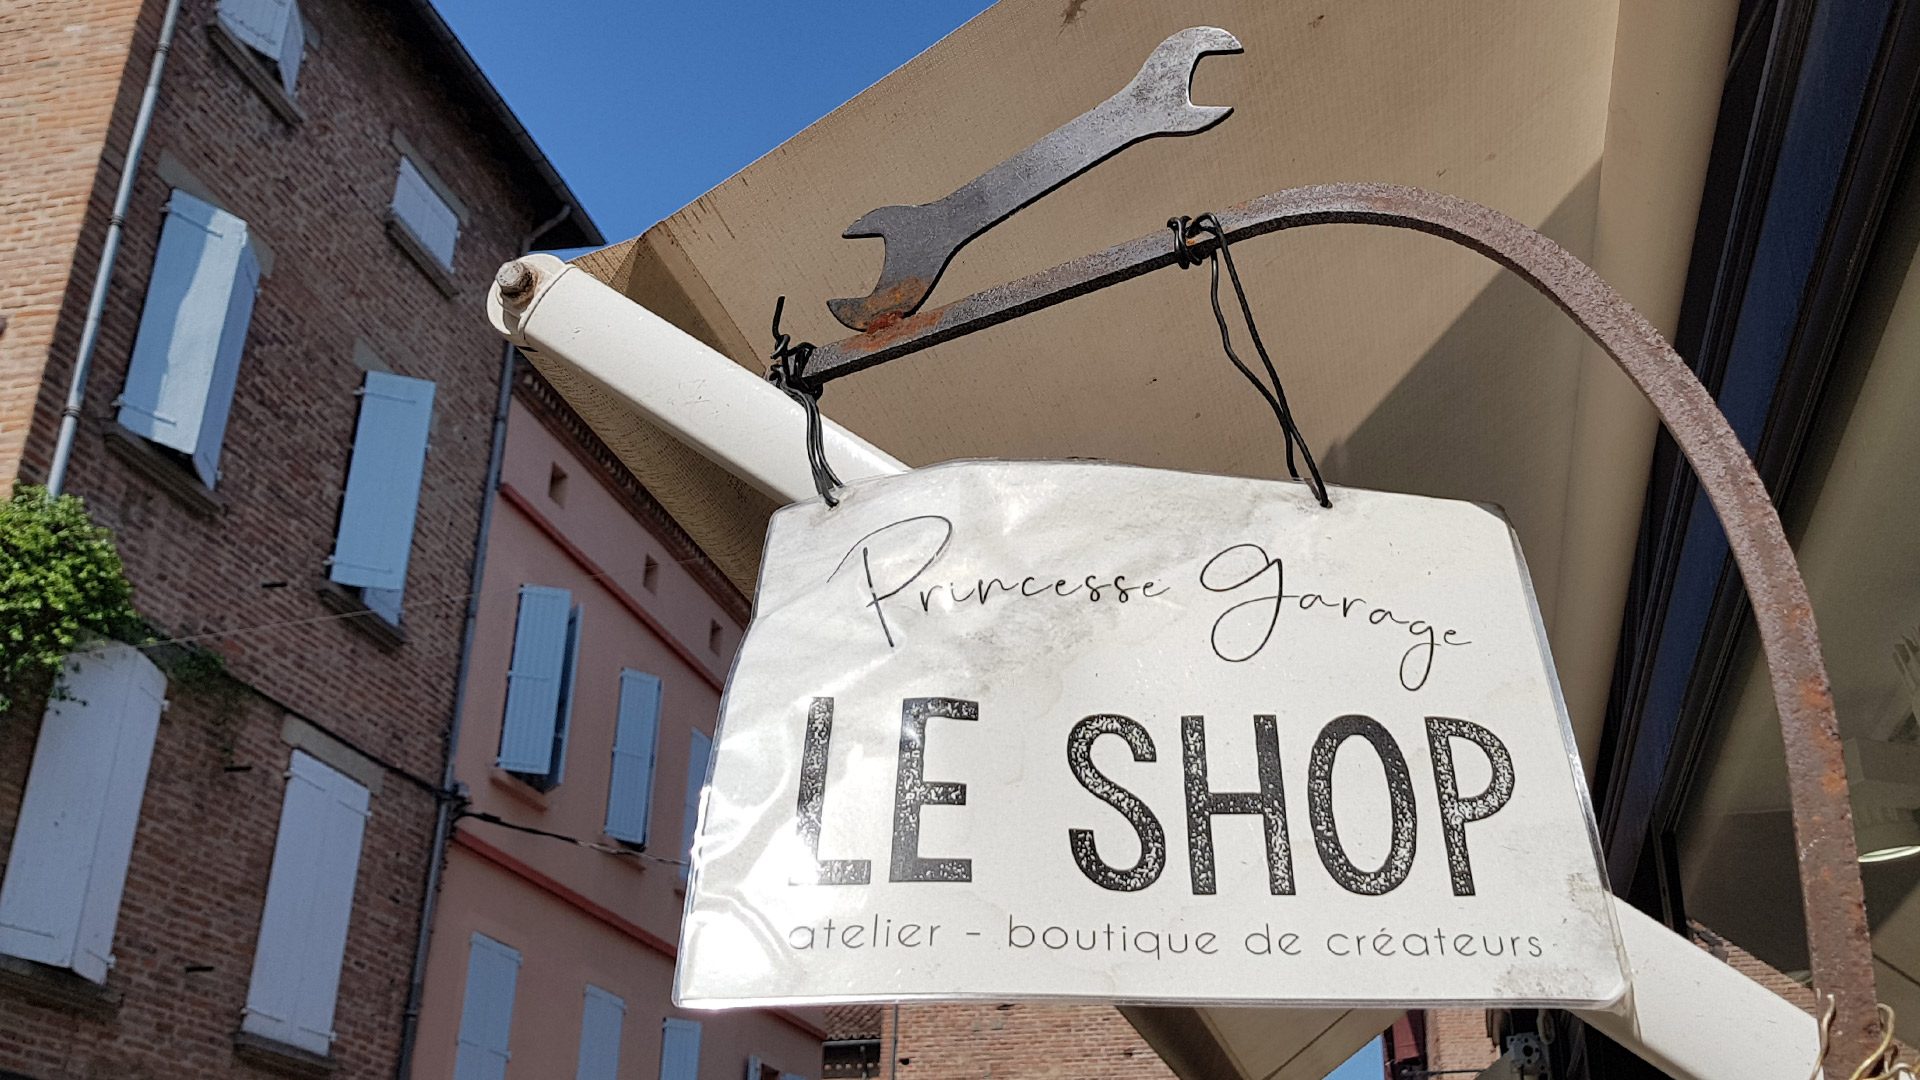 Albi for a shopping spree, local know-how, shops in town